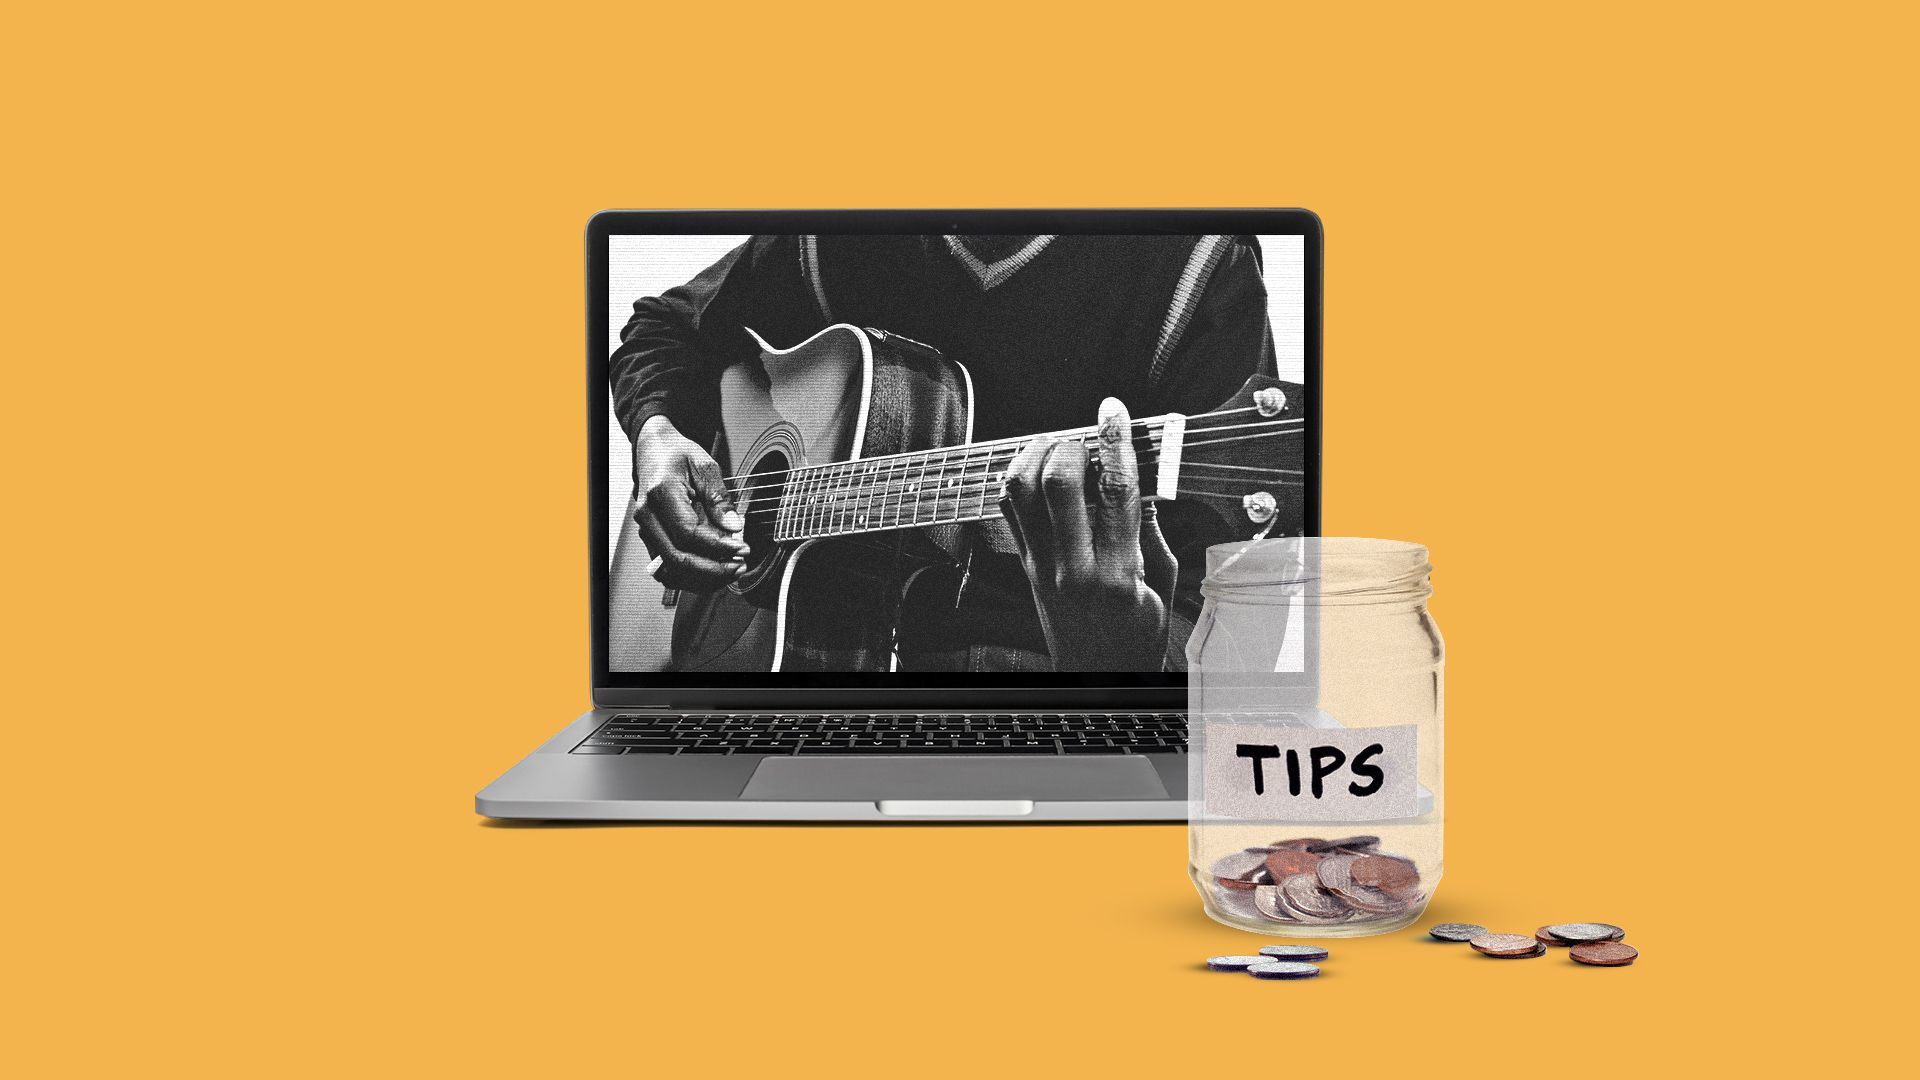 Illustration of a live performance on a laptop with a tip jar in front of the screen. 